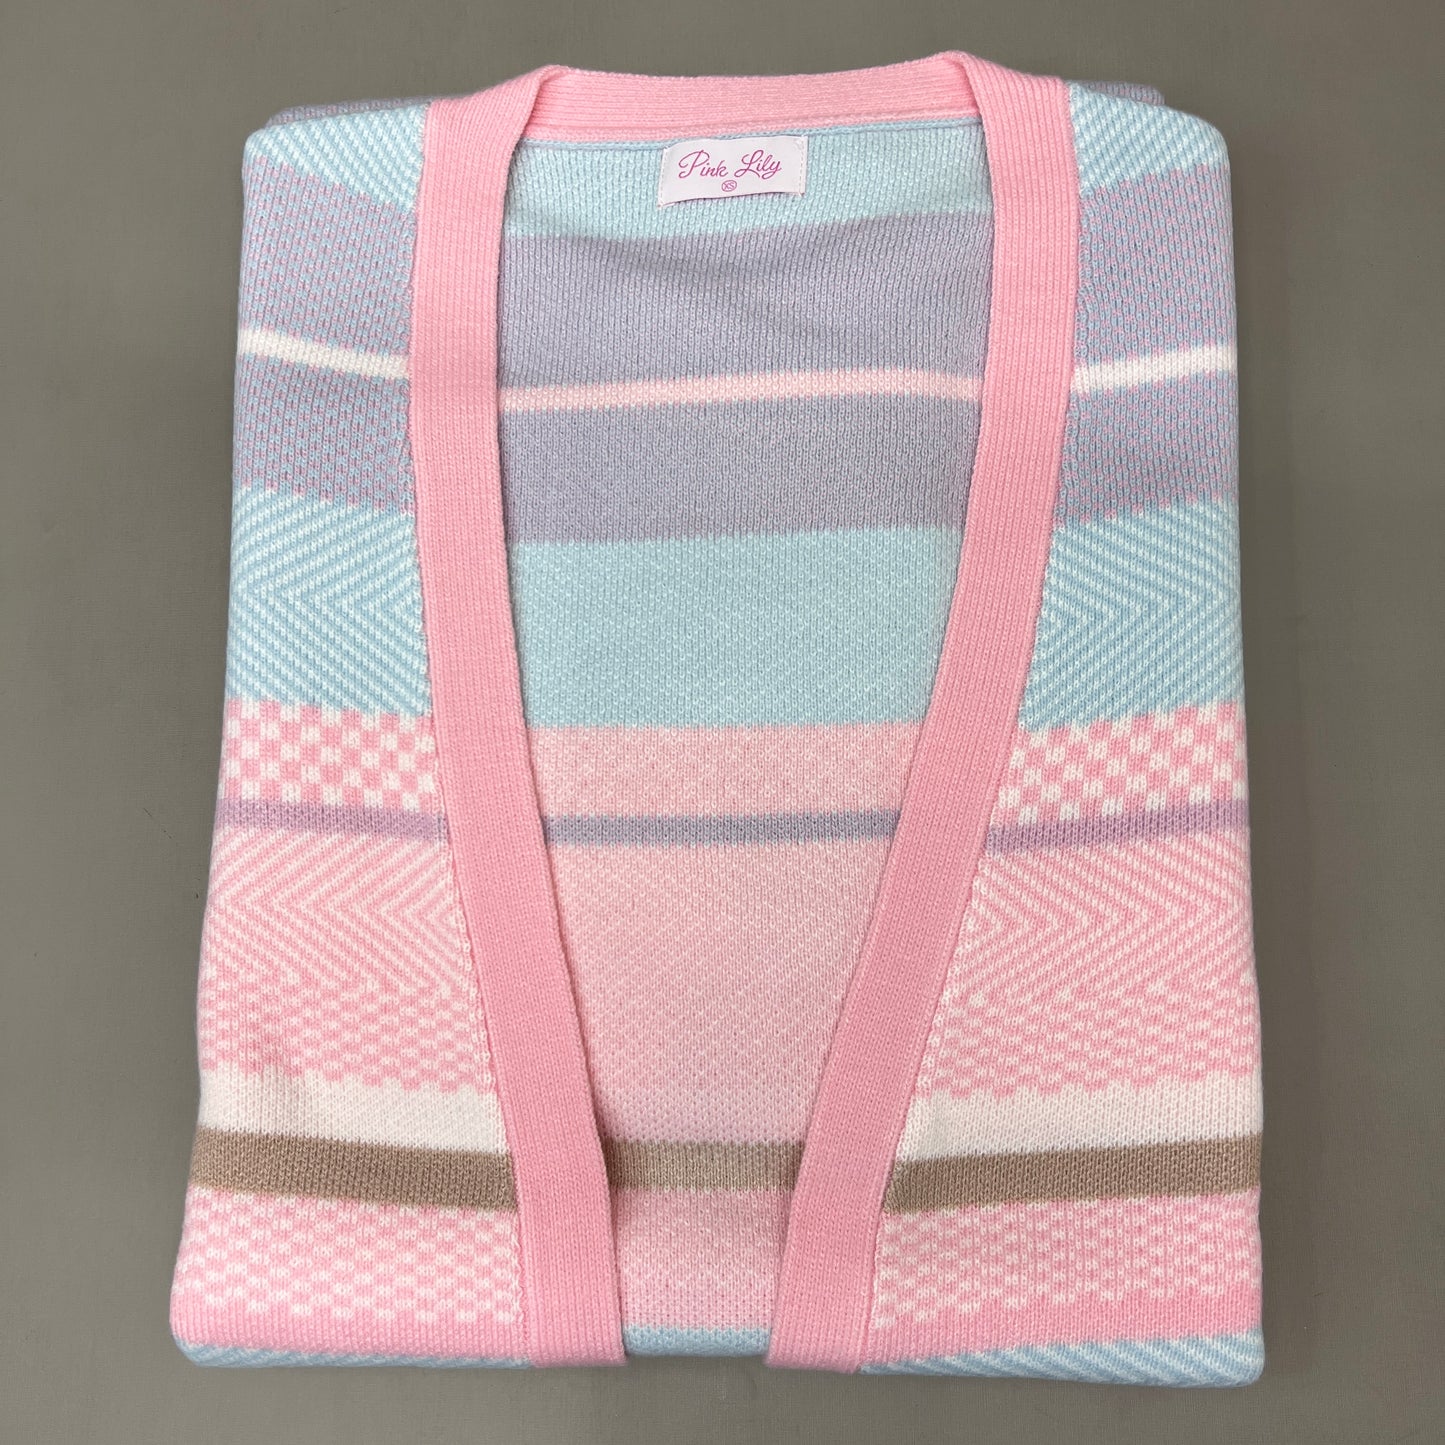 PINK LILY Multi-colored Striped Sweater Cardigan Women's Sz XS PL930 (New)